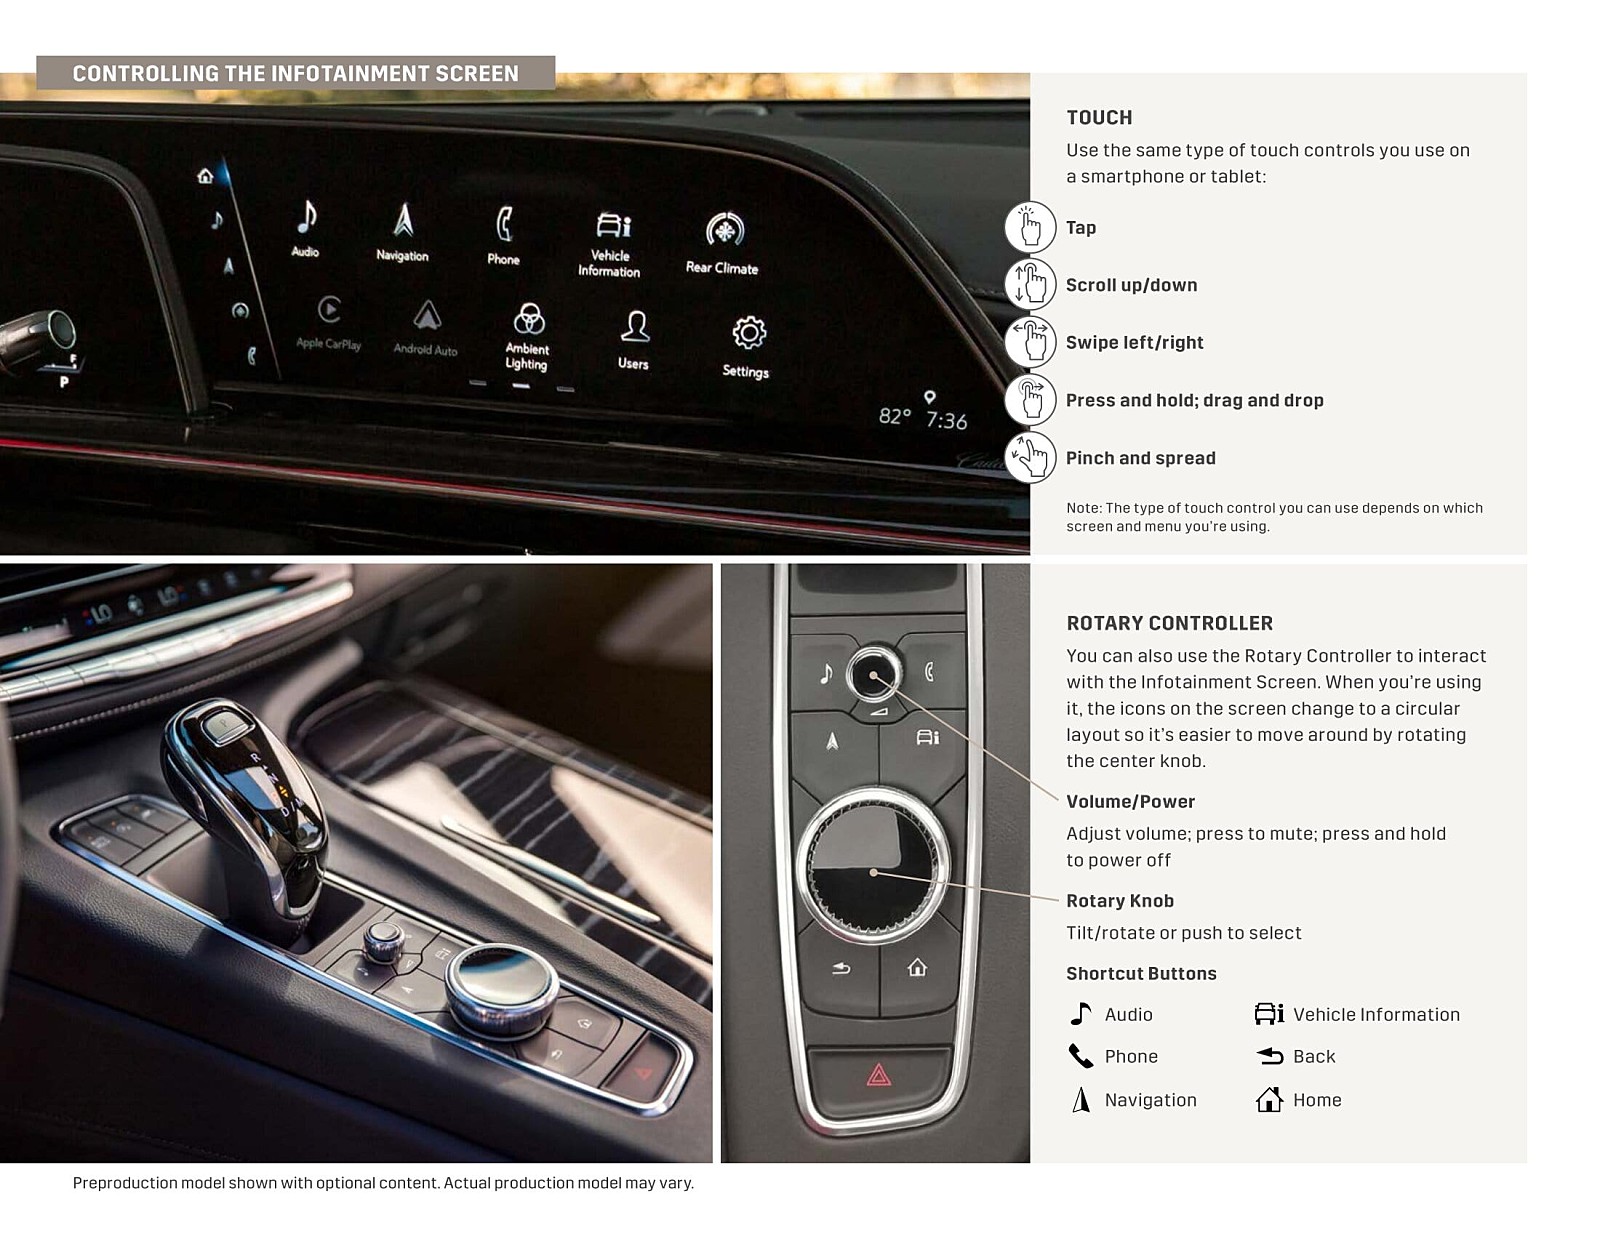 2021-cadillac-escalade-oled-infotainment-system-quick-start-guide-v2_0003.jpg?type=w1600